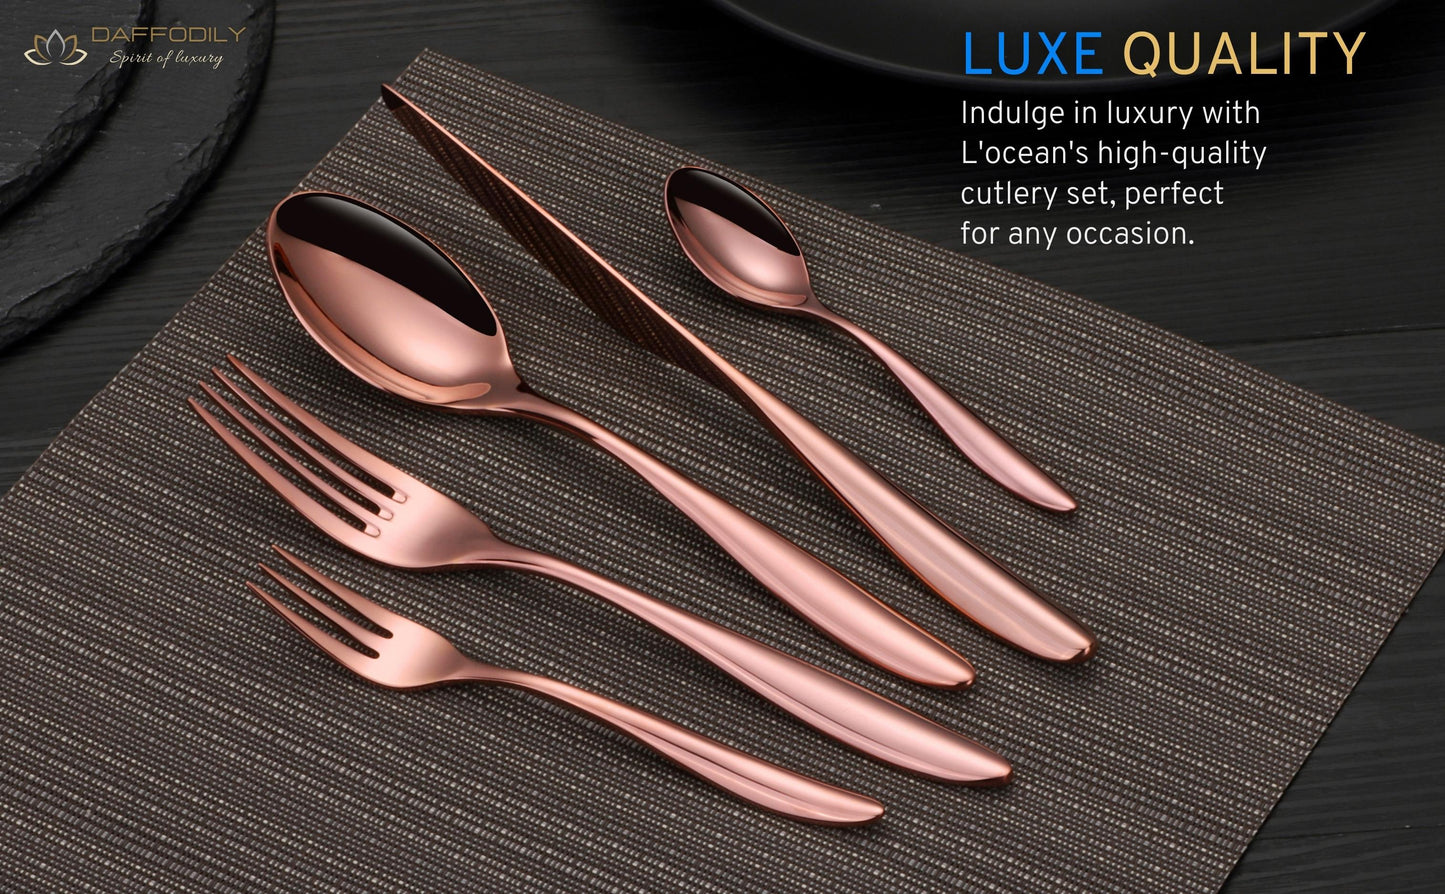 Cutlery sets that complement various home décor styles and themes